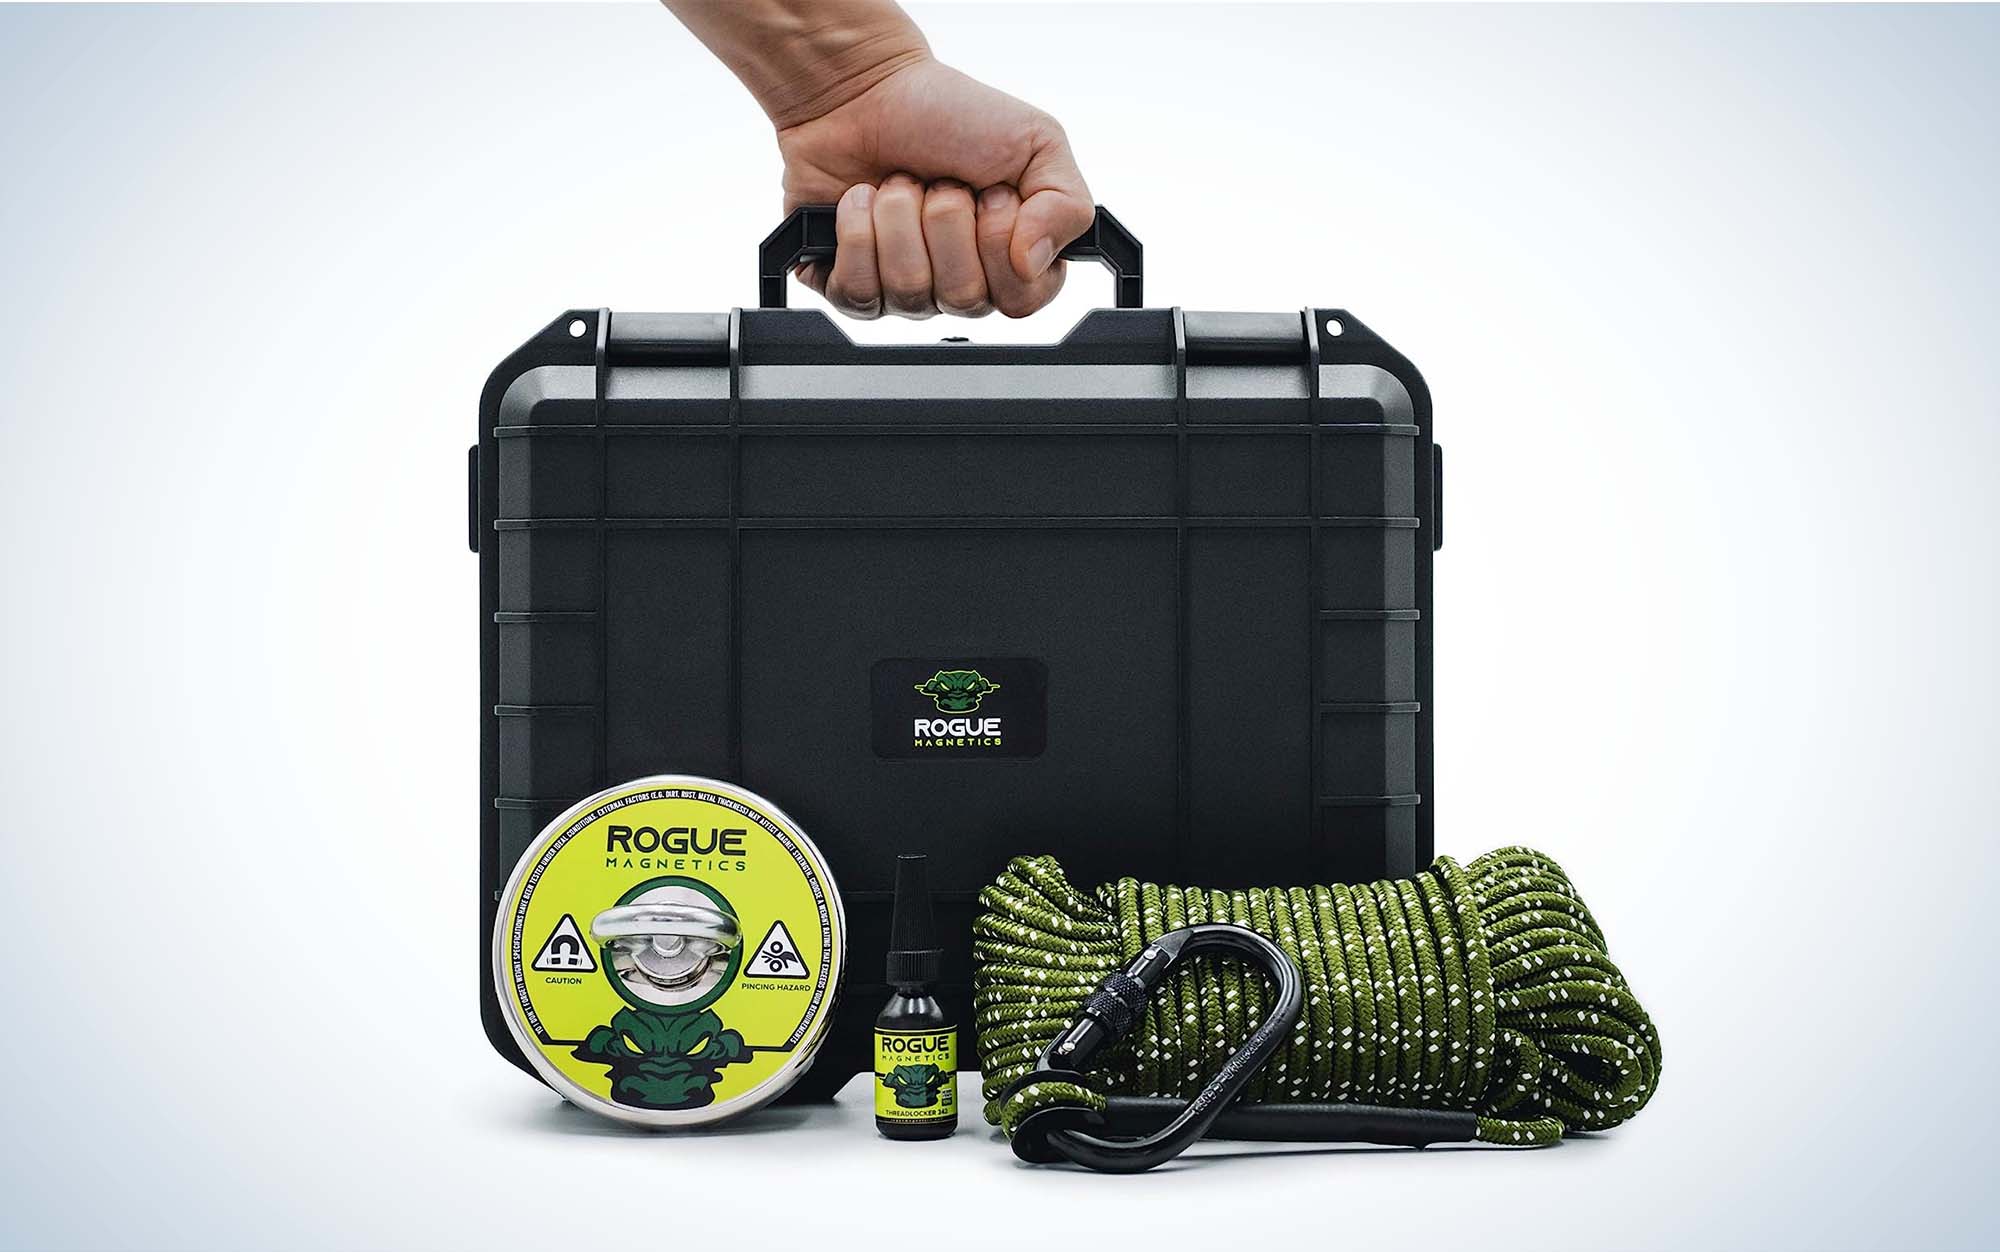 Browse Magnet Fishing Kits, New Arrivals ( Best Fishing Magnets) at  Muscular Magnetics